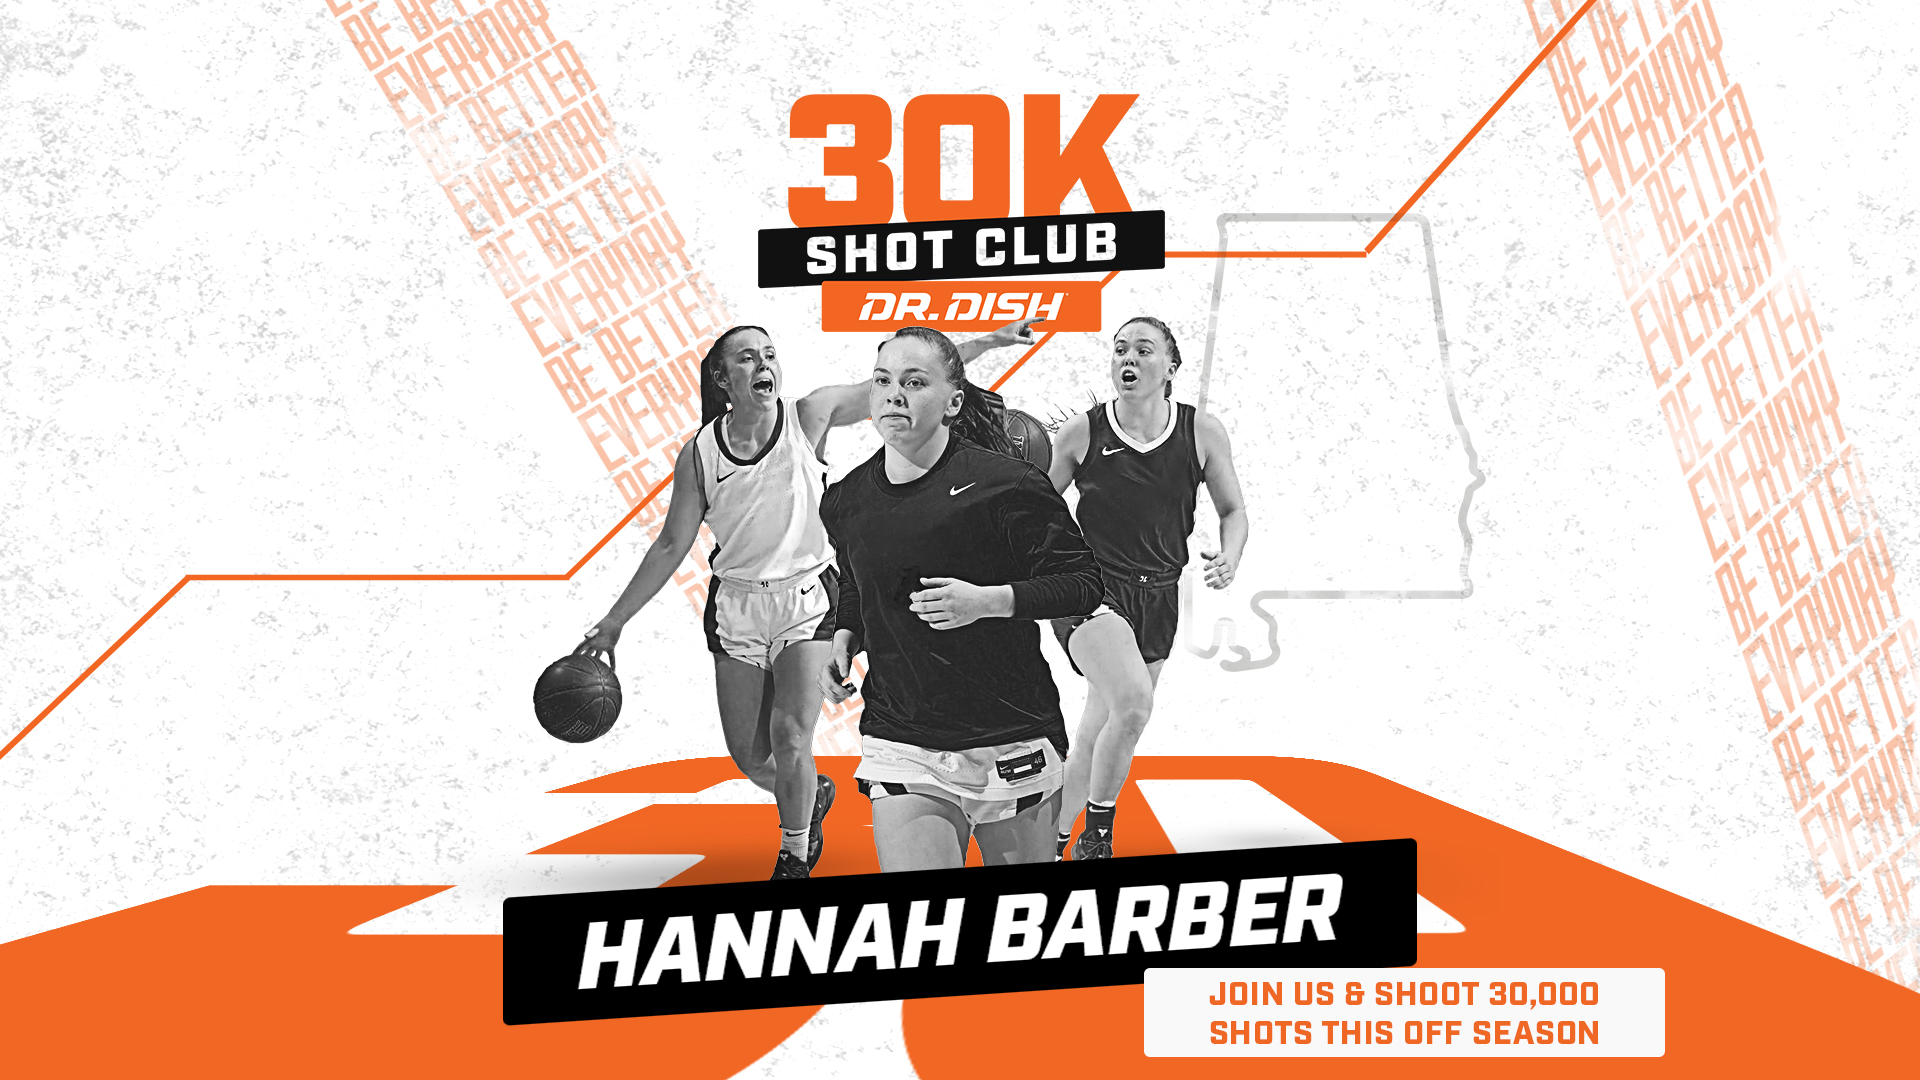 Join the 30K Shot Club This Off-Season with Hannah Barber